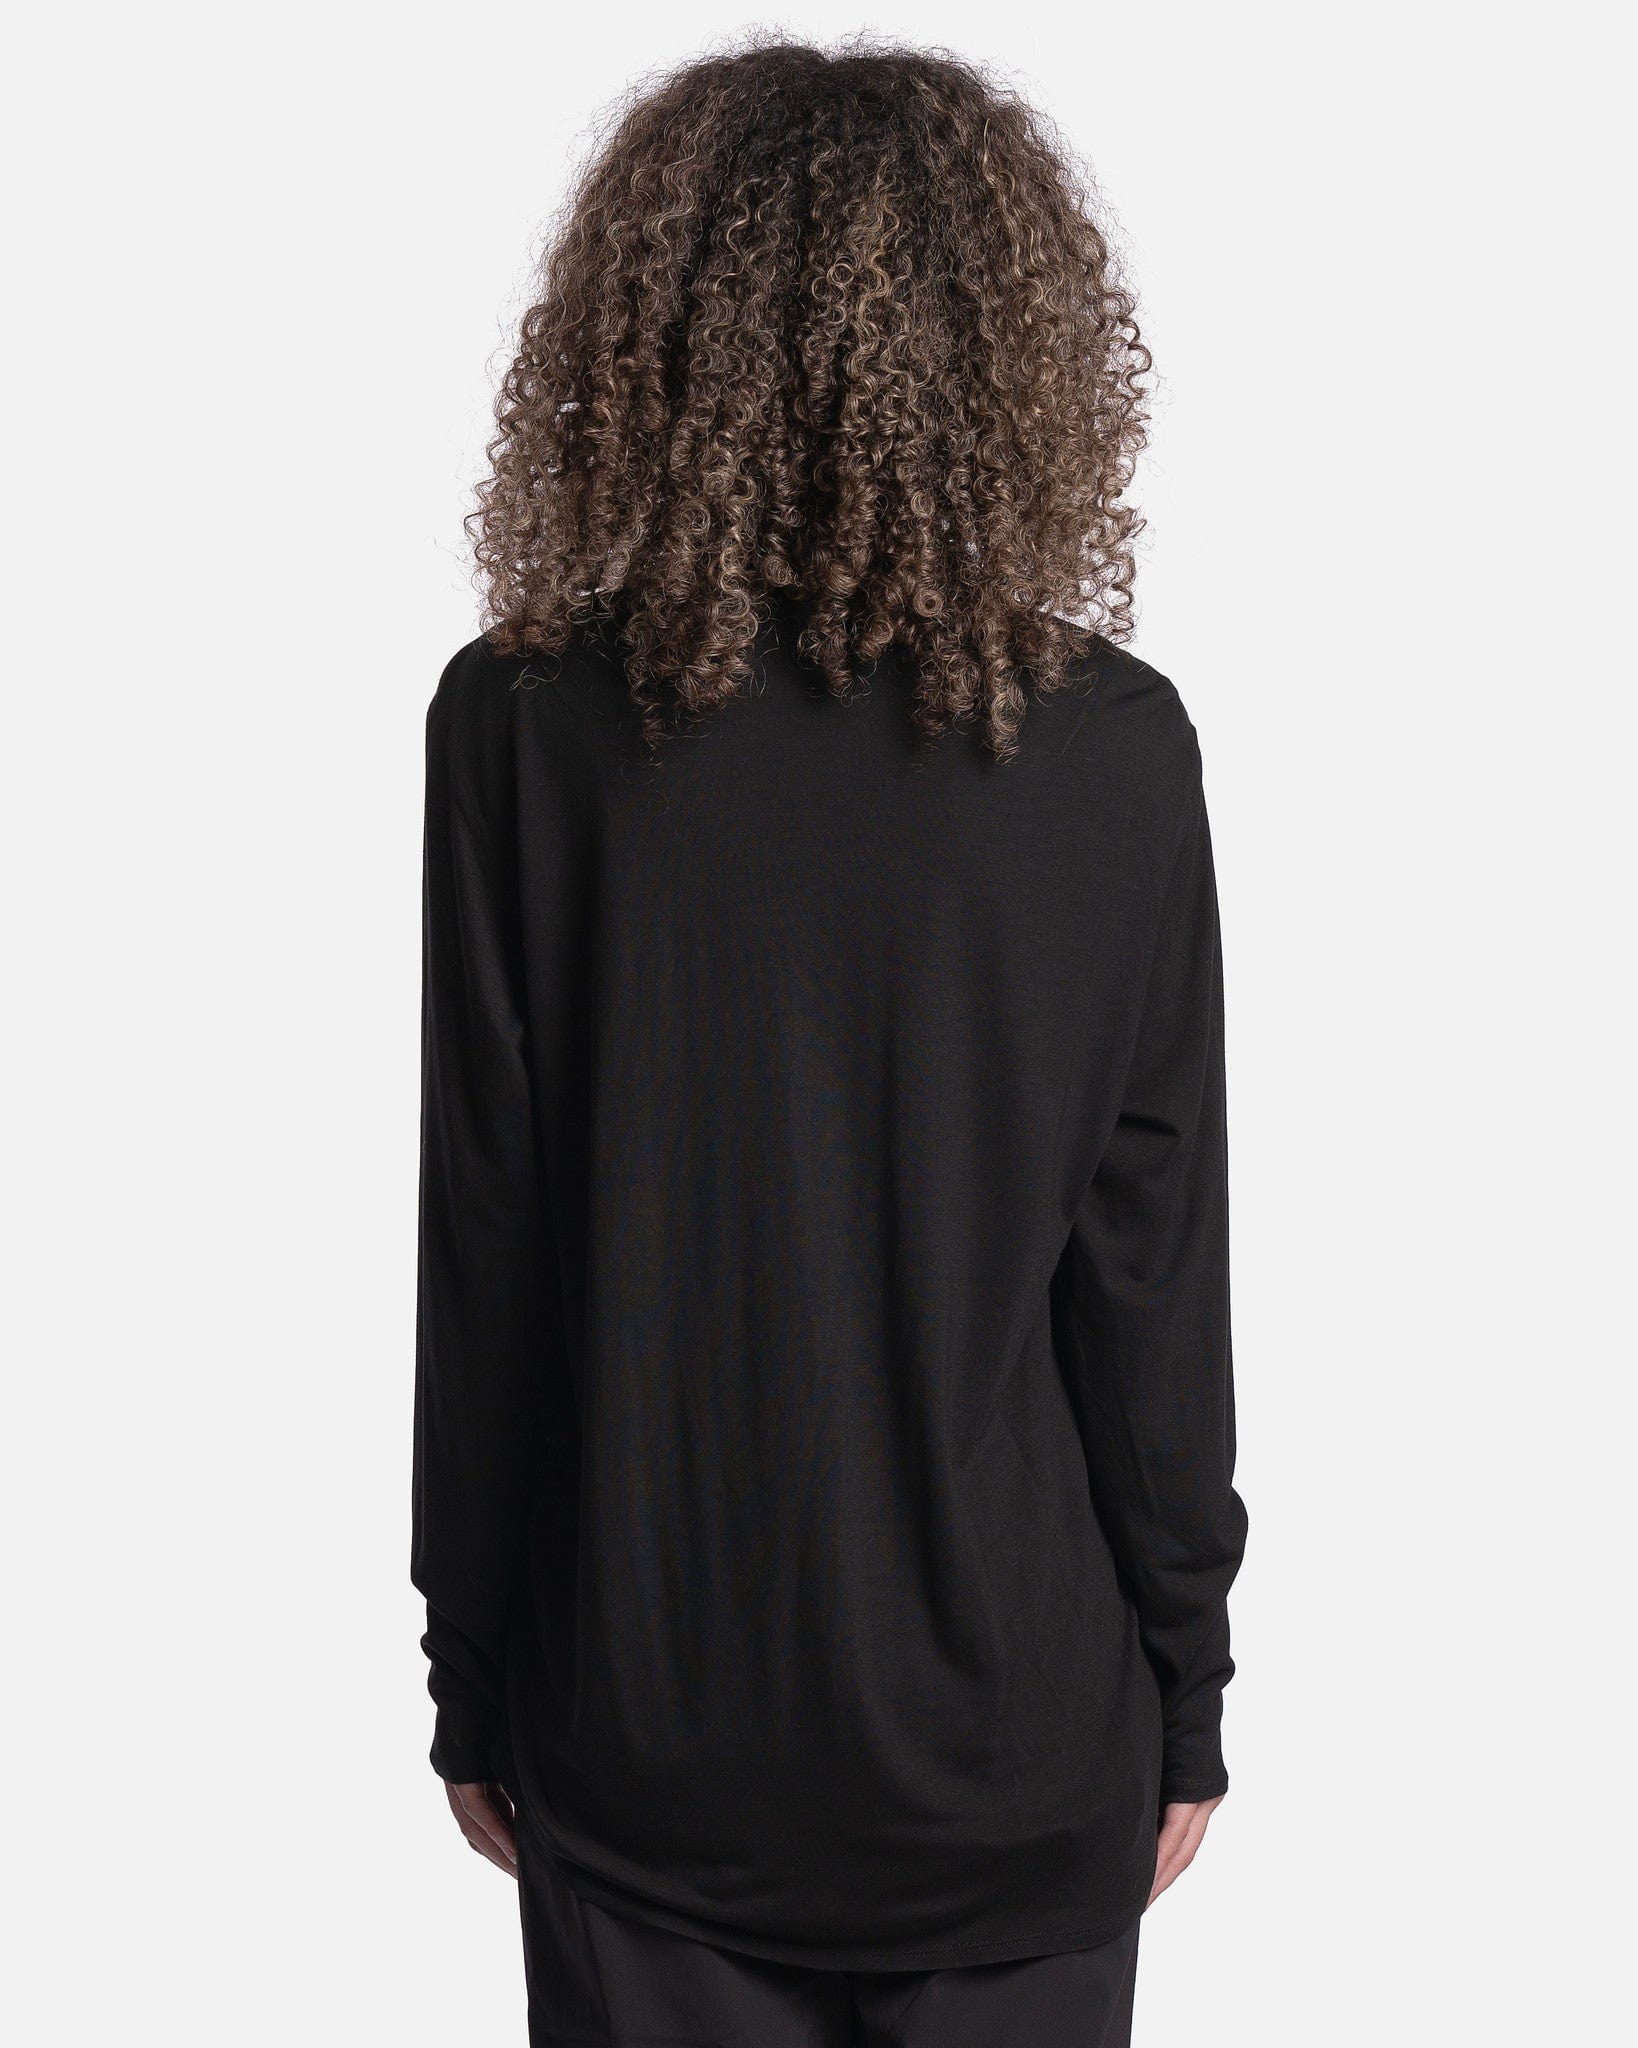 POST ARCHIVE FACTION (P.A.F) Women Tops Women's 5.0+ Shirt Right in Black